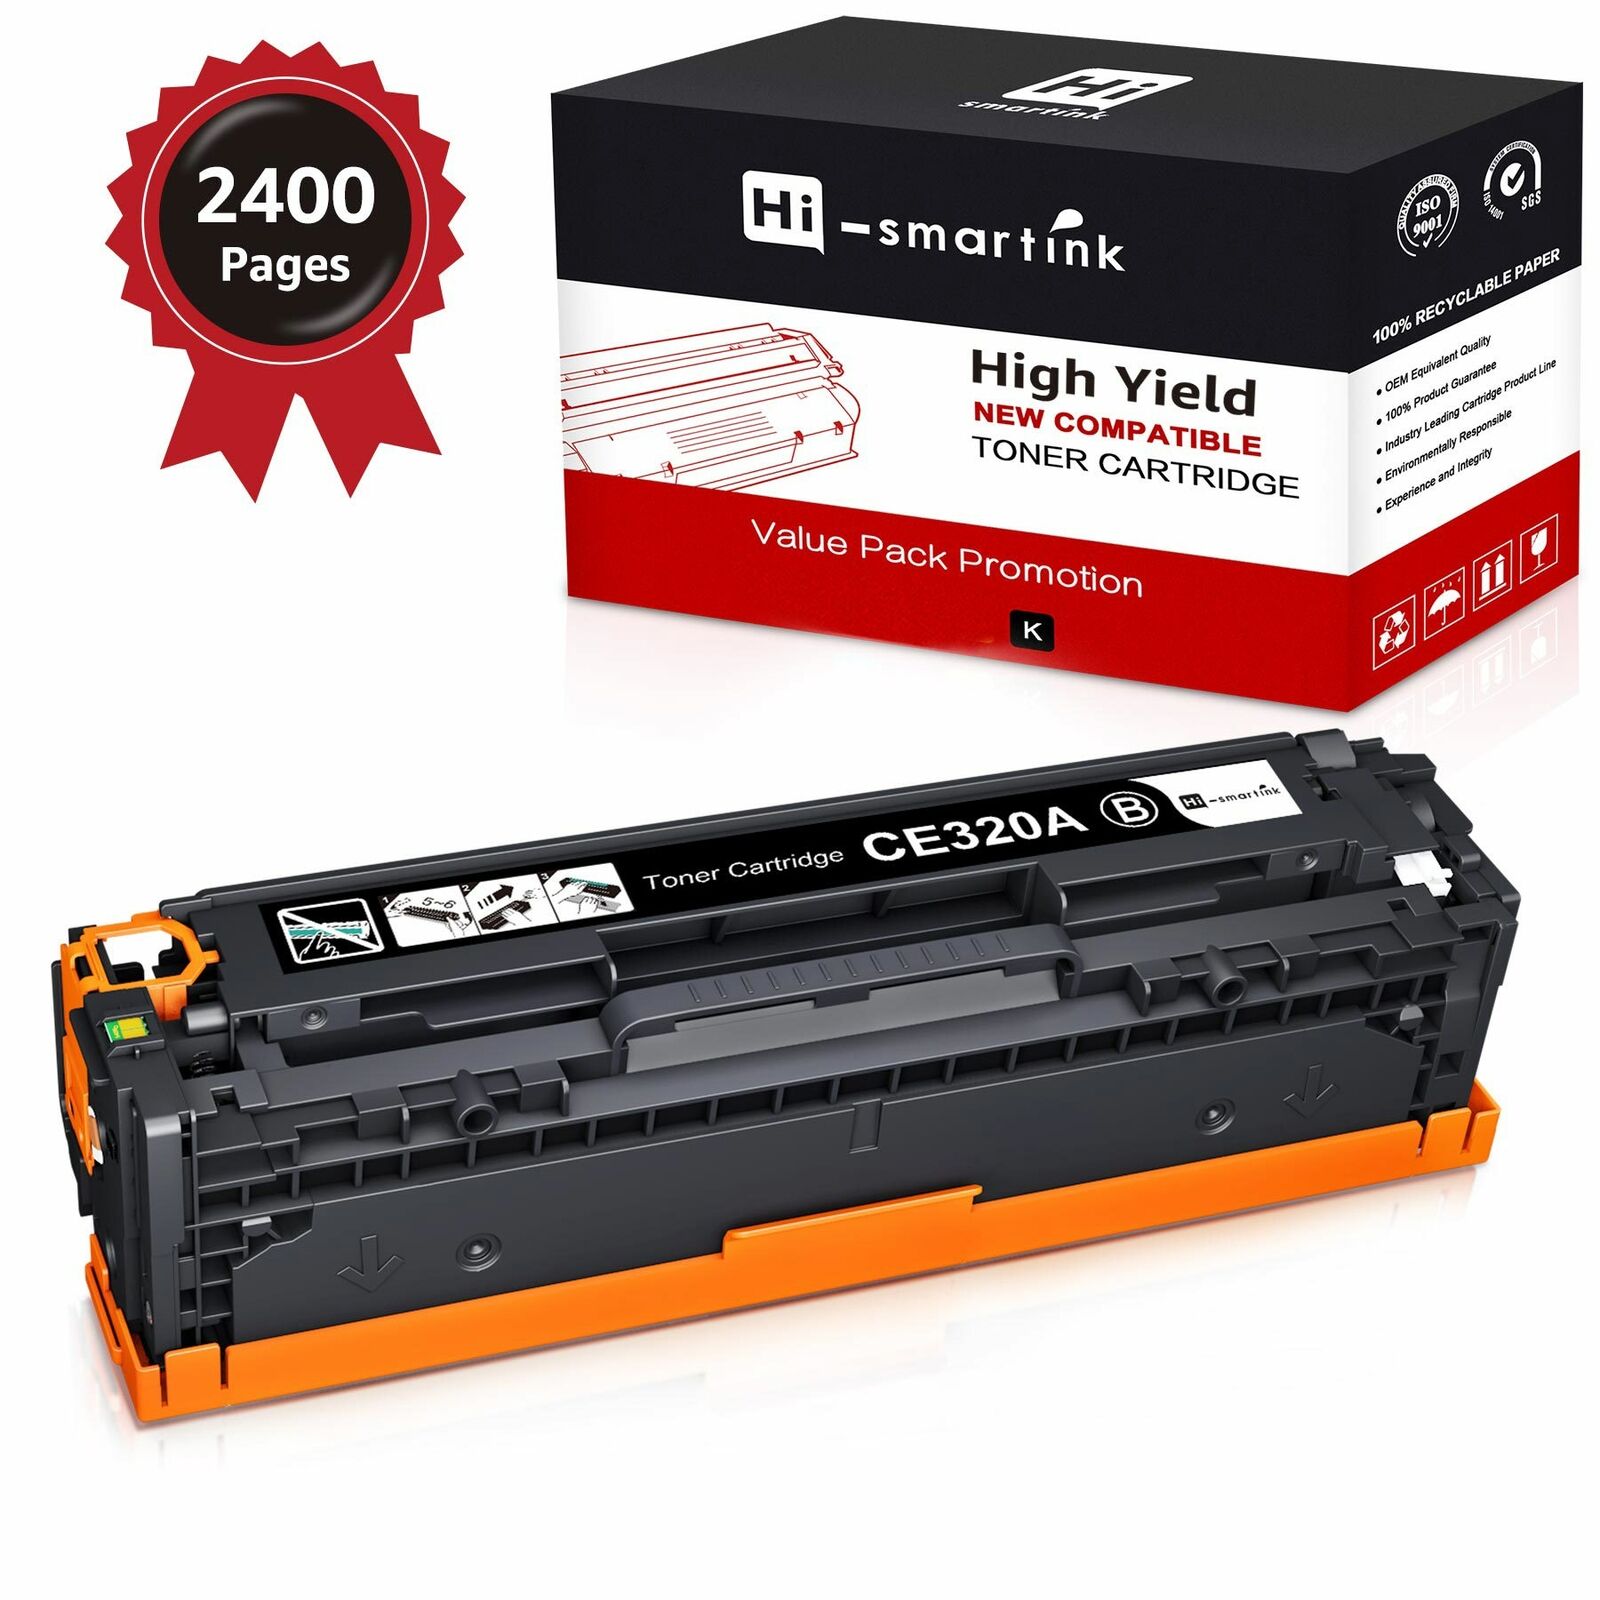 High Yield CE320A-CE323A 128A Toner Set Lot for HP LaserJet CP1525nw CM1415fnw